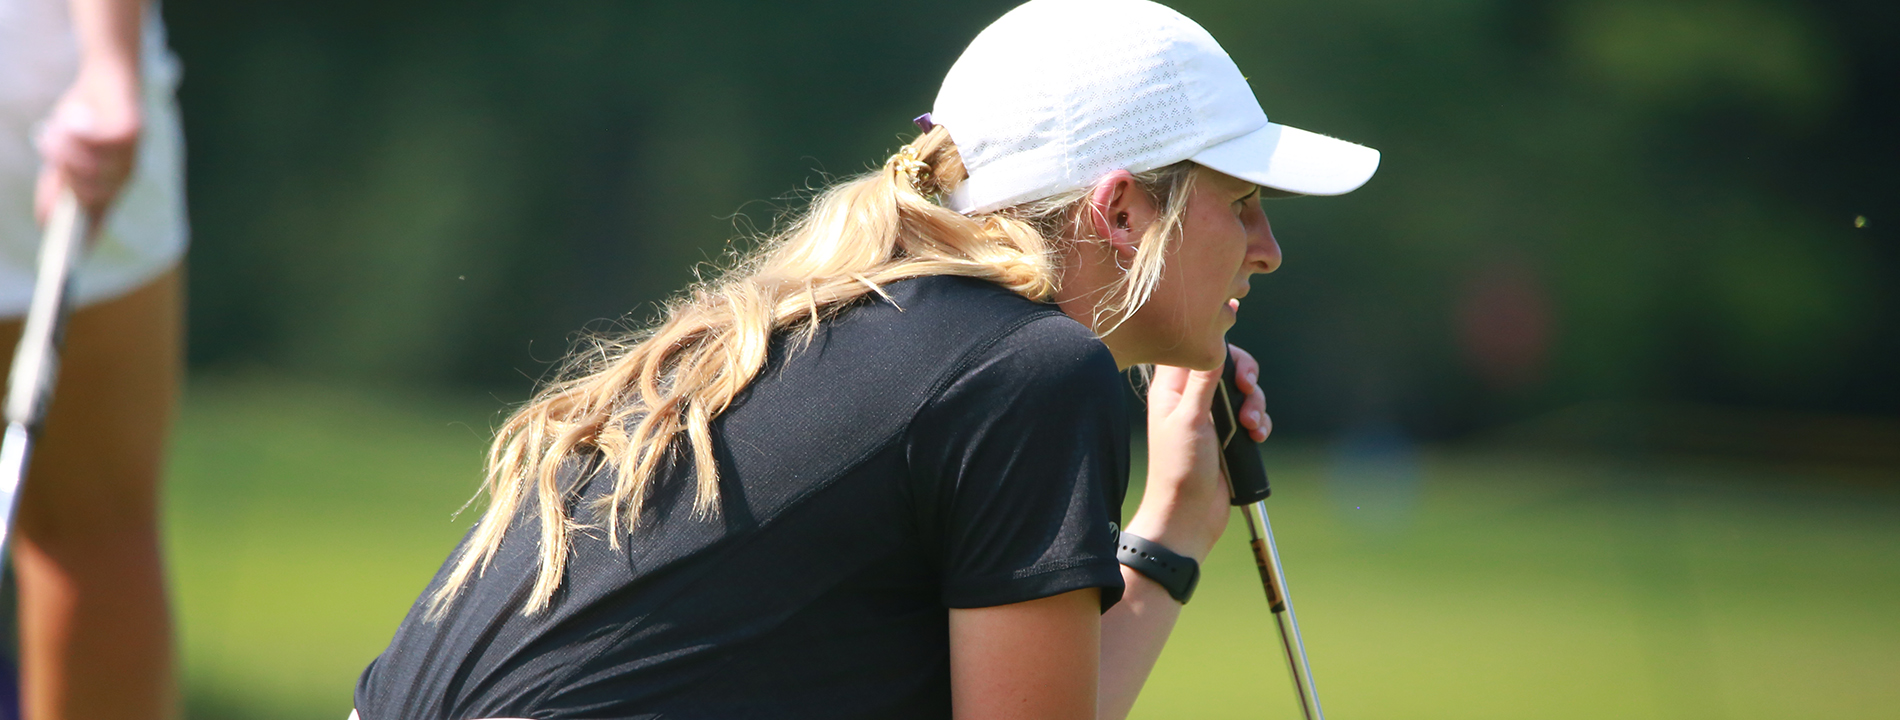 Tech women's golf team back in action at F&M Bank APSU Intercollegiate Monday and Tuesday